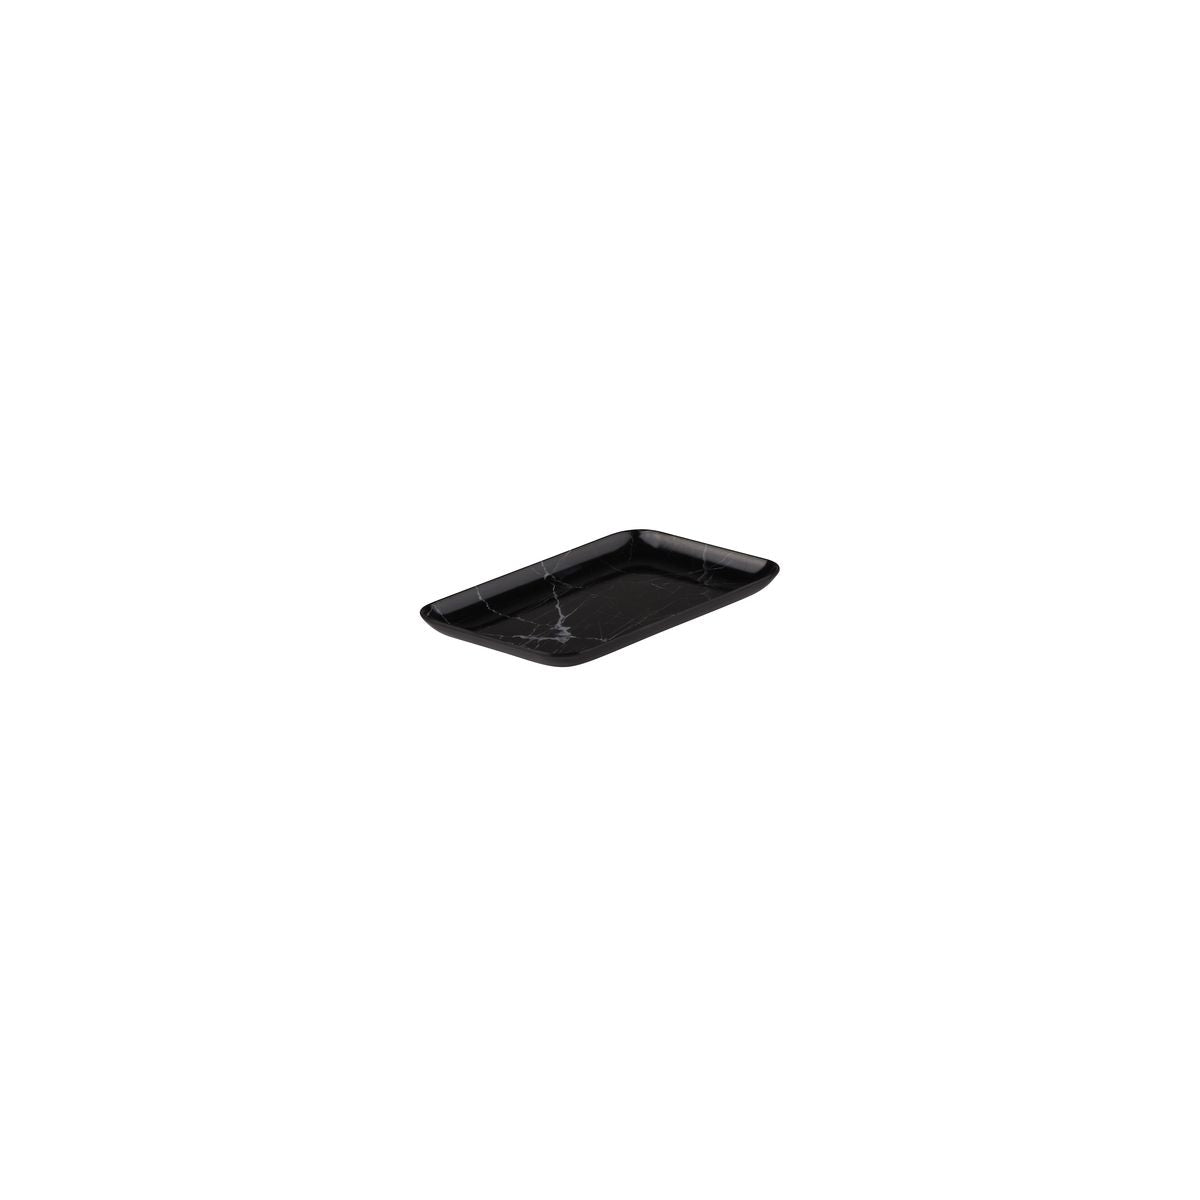 Rectangular Platter, 205 x 140mm, Coupe, Melamine - Black Marble from Ryner Melamine. Sold in boxes of 12. Hospitality quality at wholesale price with The Flying Fork! 